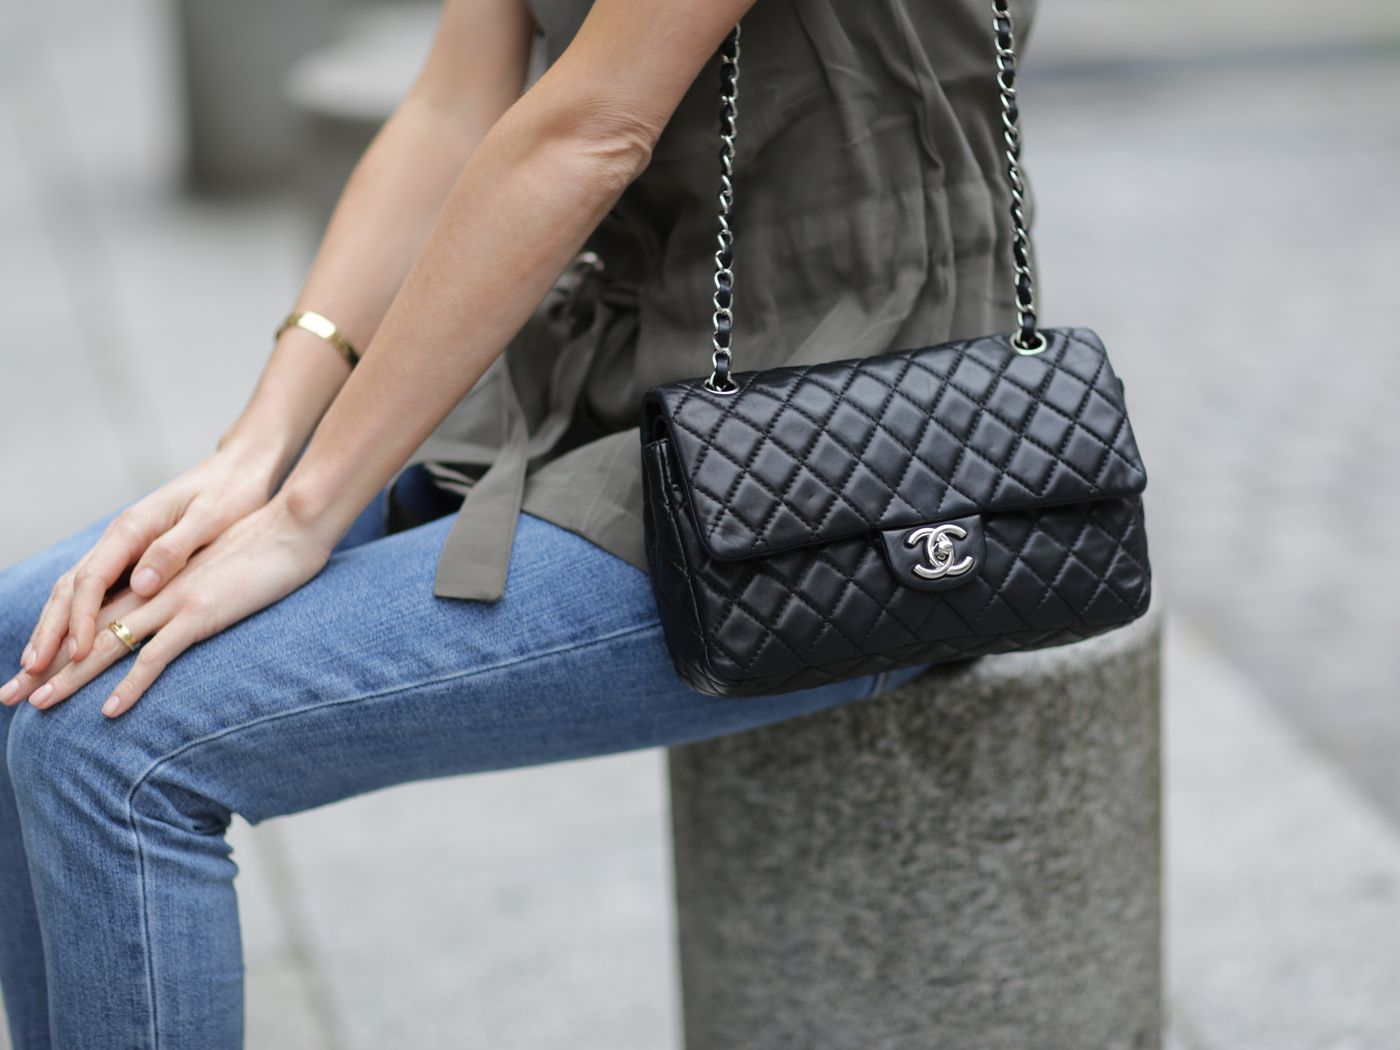 how much is the cheapest chanel bag